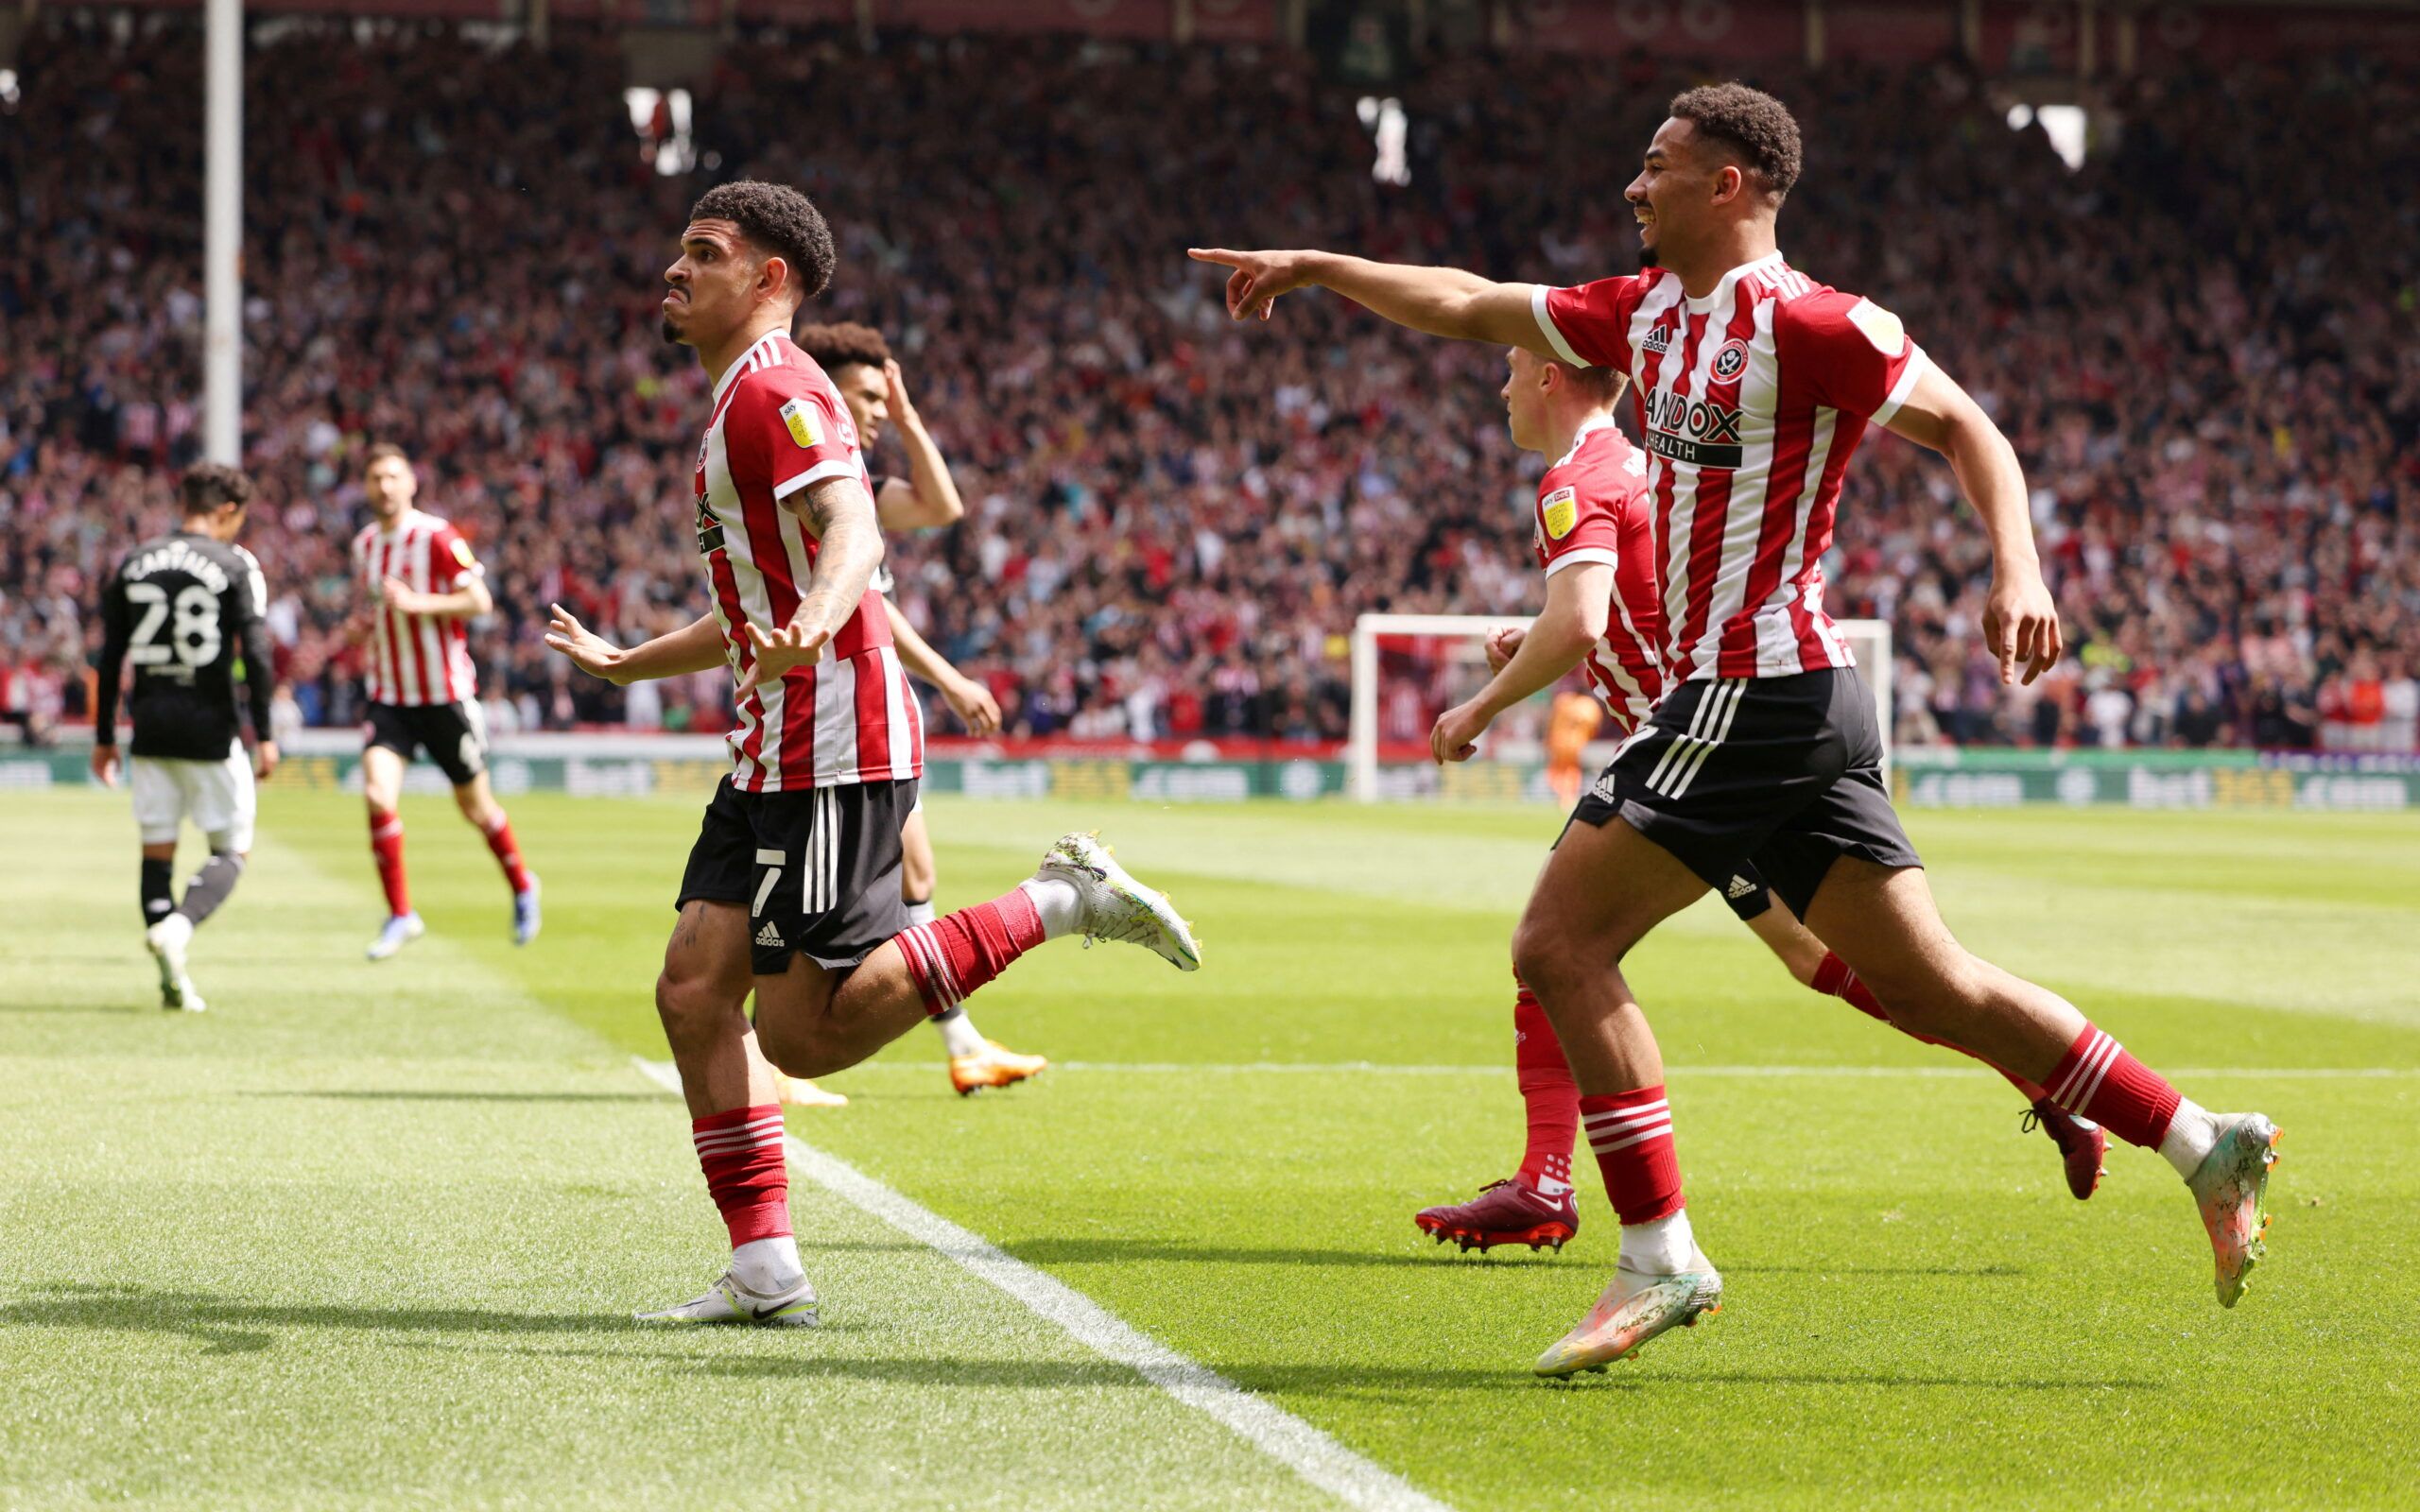 Soccer Football - Championship - Sheffield United v Fulham - Bramall Lane, Sheffield, Britain - May 7, 2022 Sheffield United's Morgan Gibbs-White celebrates scoring their first goal     Action Images/John Clifton  EDITORIAL USE ONLY. No use with unauthorized audio, video, data, fixture lists, club/league logos or 